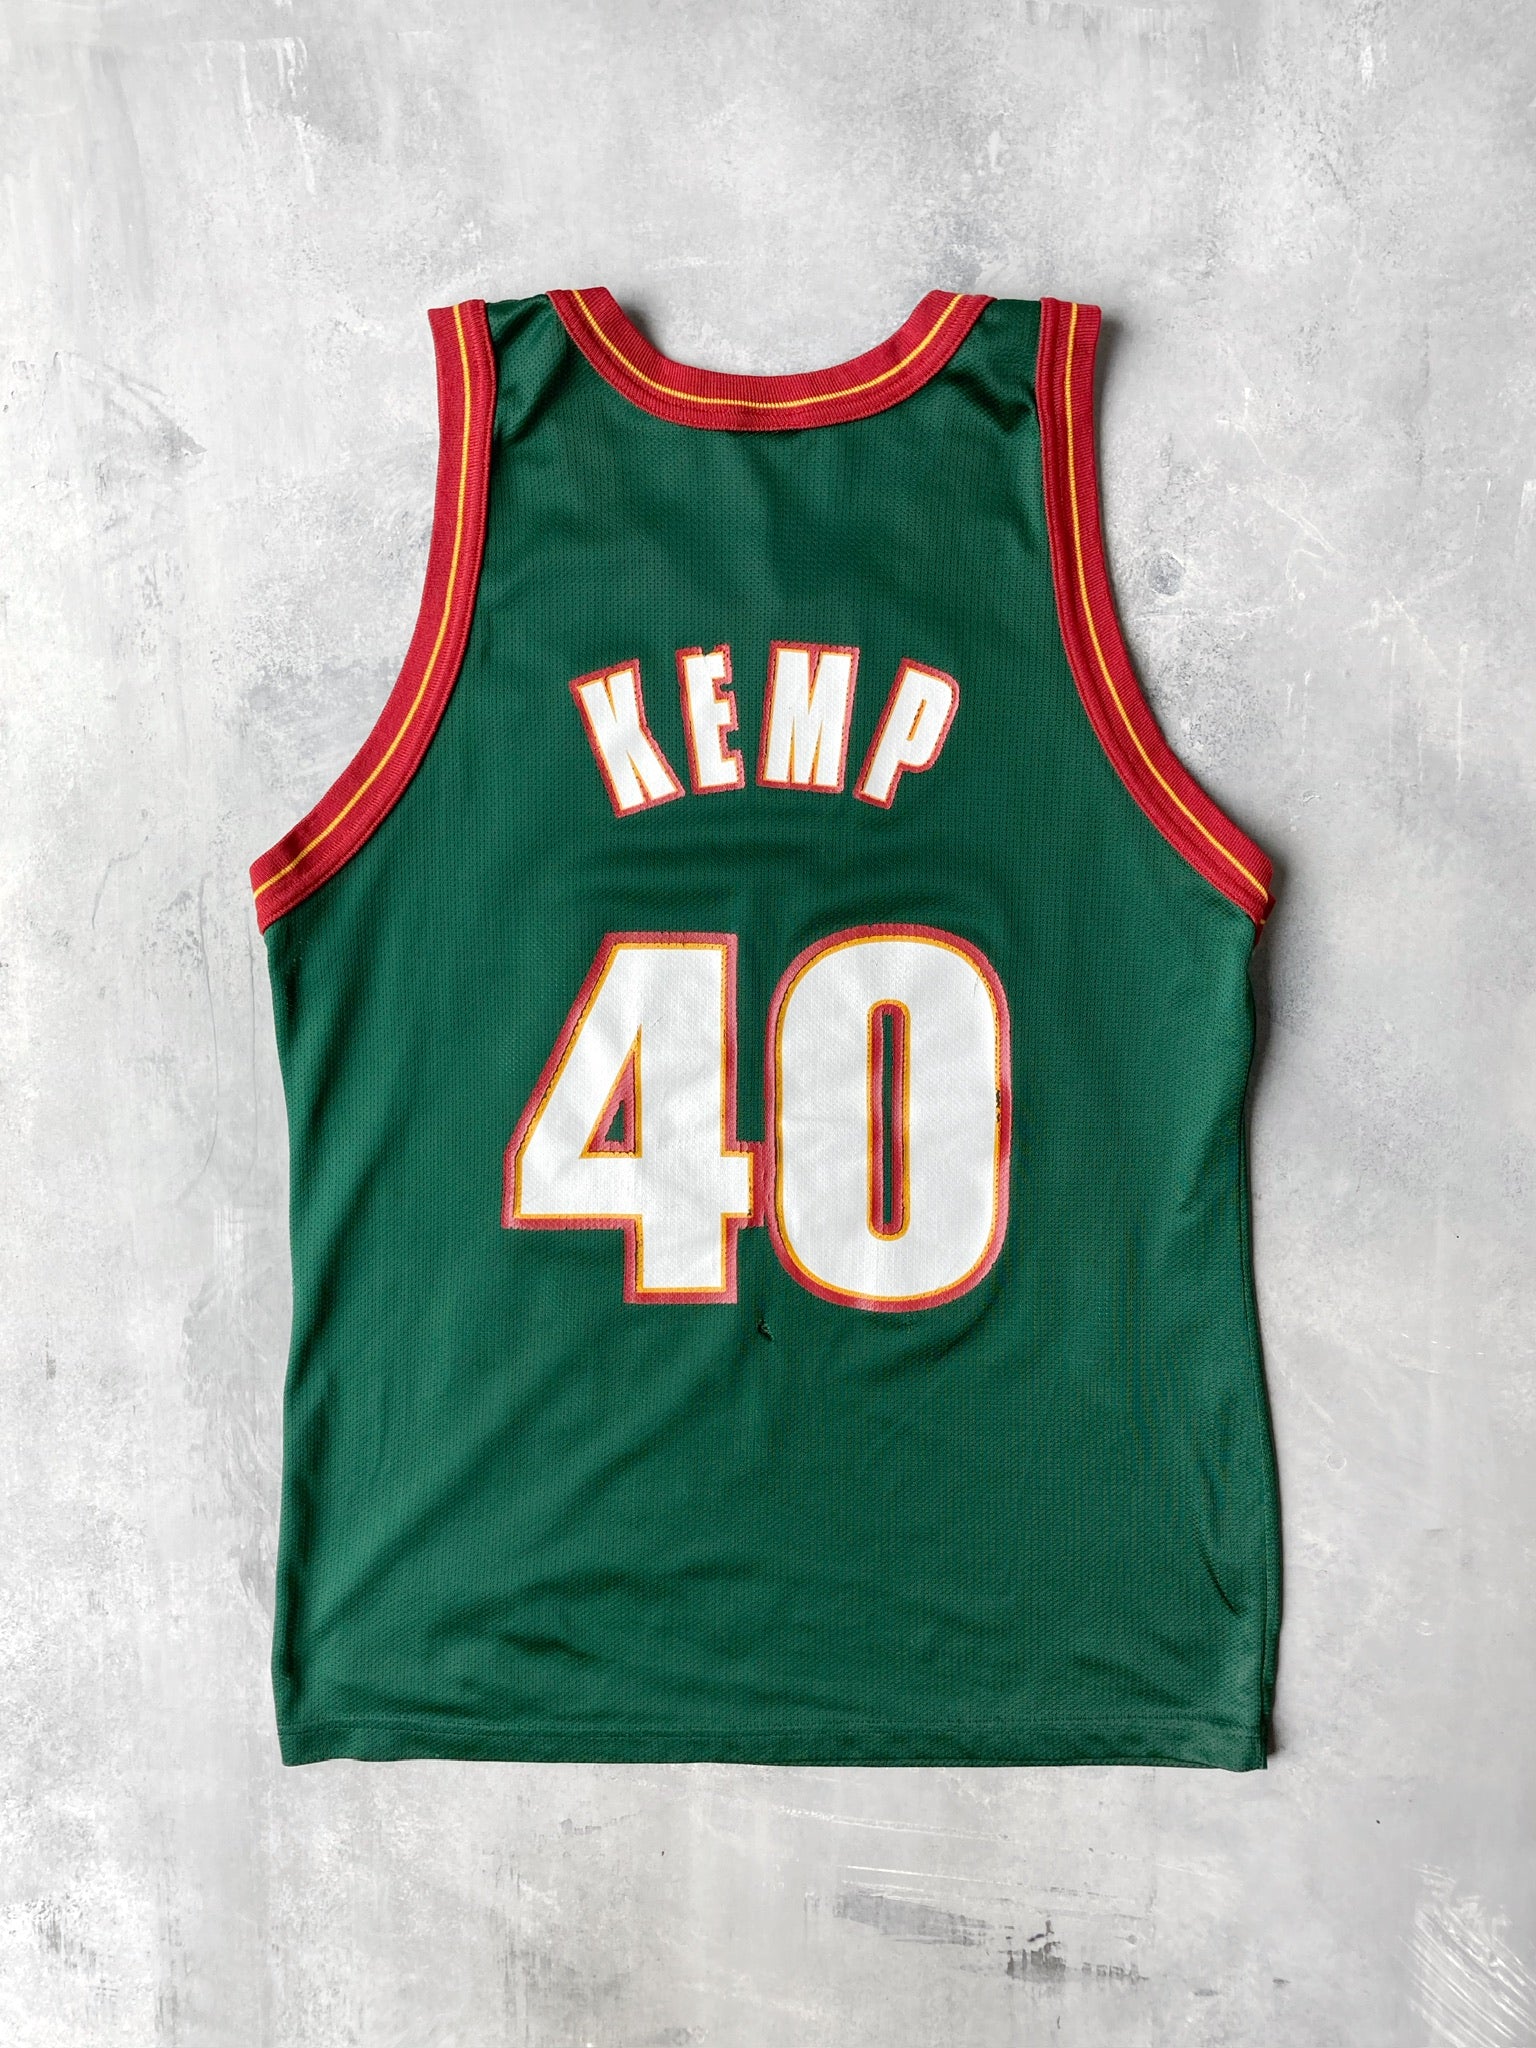 seattle supersonics jersey home